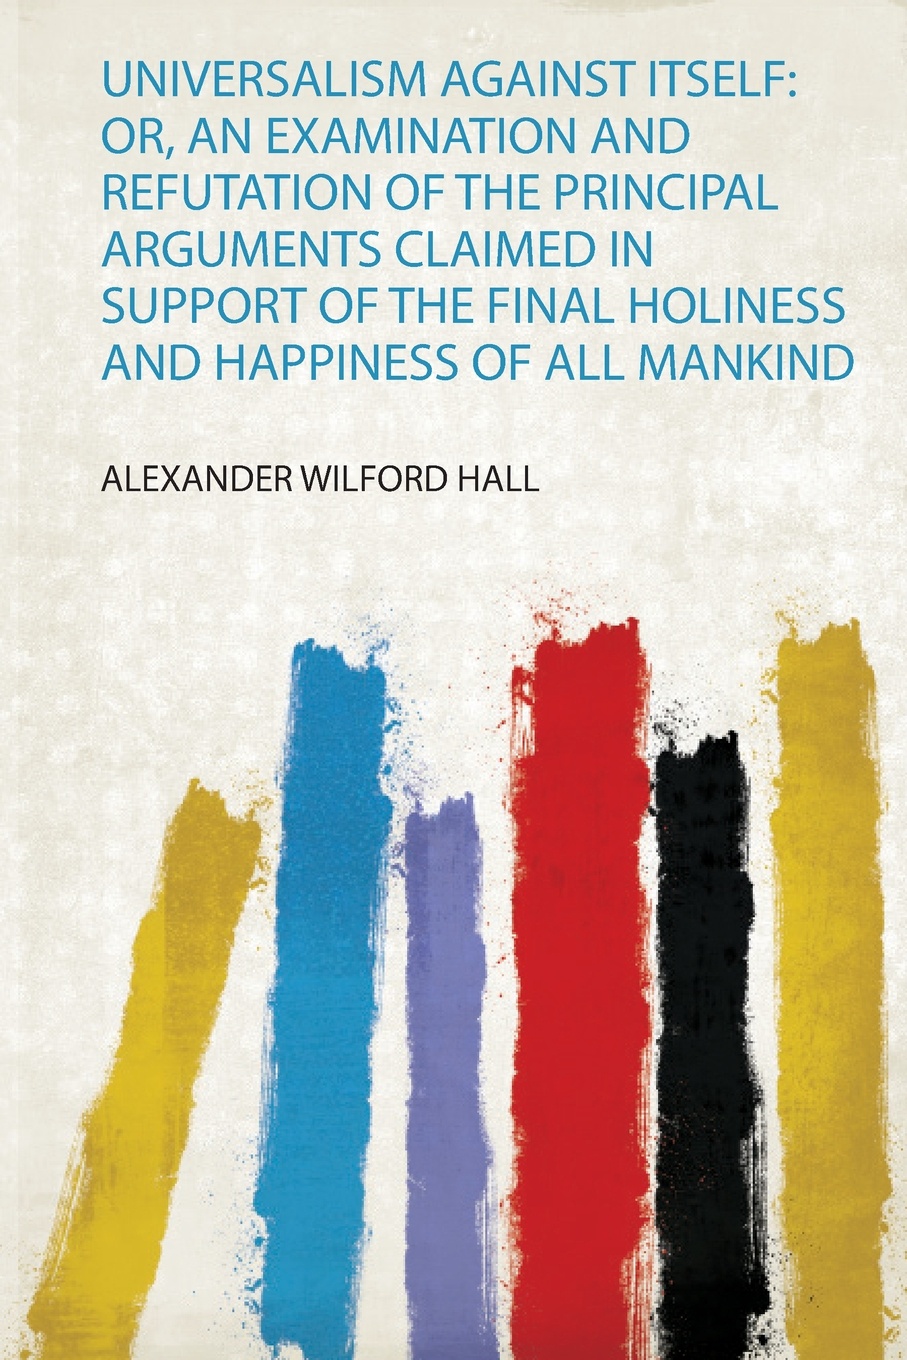 Universalism Against Itself. Or, an Examination and Refutation of the Principal Arguments Claimed in Support of the Final Holiness and Happiness of All Mankind